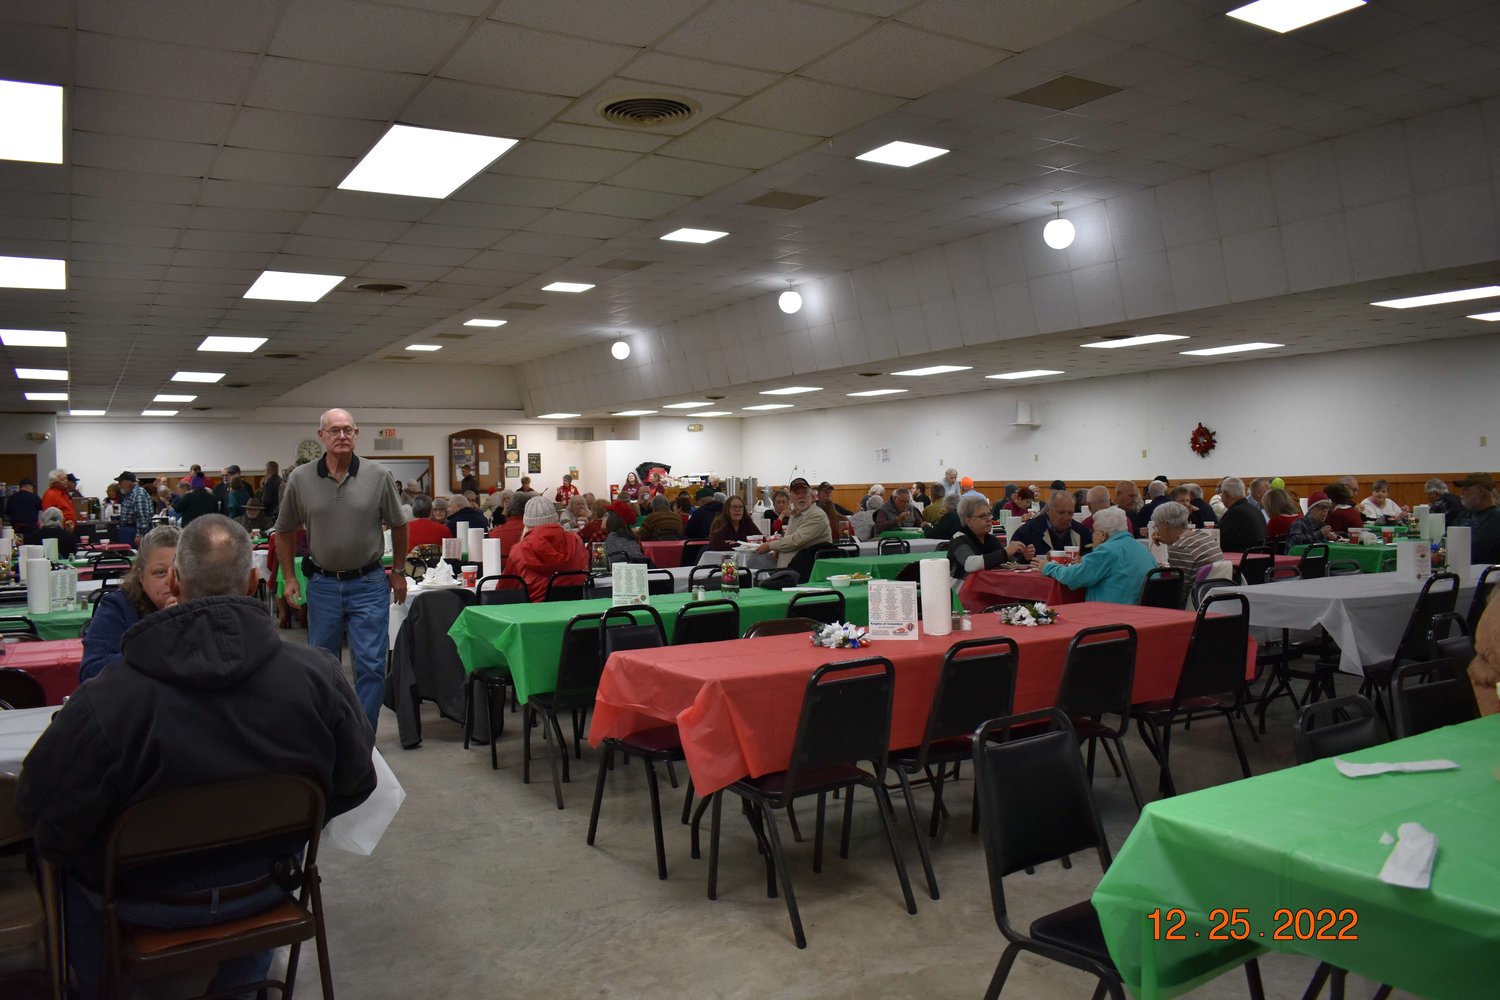 Members of Knights of Columbus Jay Harris Council 8620 and Ladies Auxiliary in Warsaw serve the council’s 37th annual Christmas Dinner on Dec. 25, 2022. Volunteers served between 350 and 400 meals to people who were hungry, homebound or otherwise in need of a good meal and cheerful company on Christmas Day.